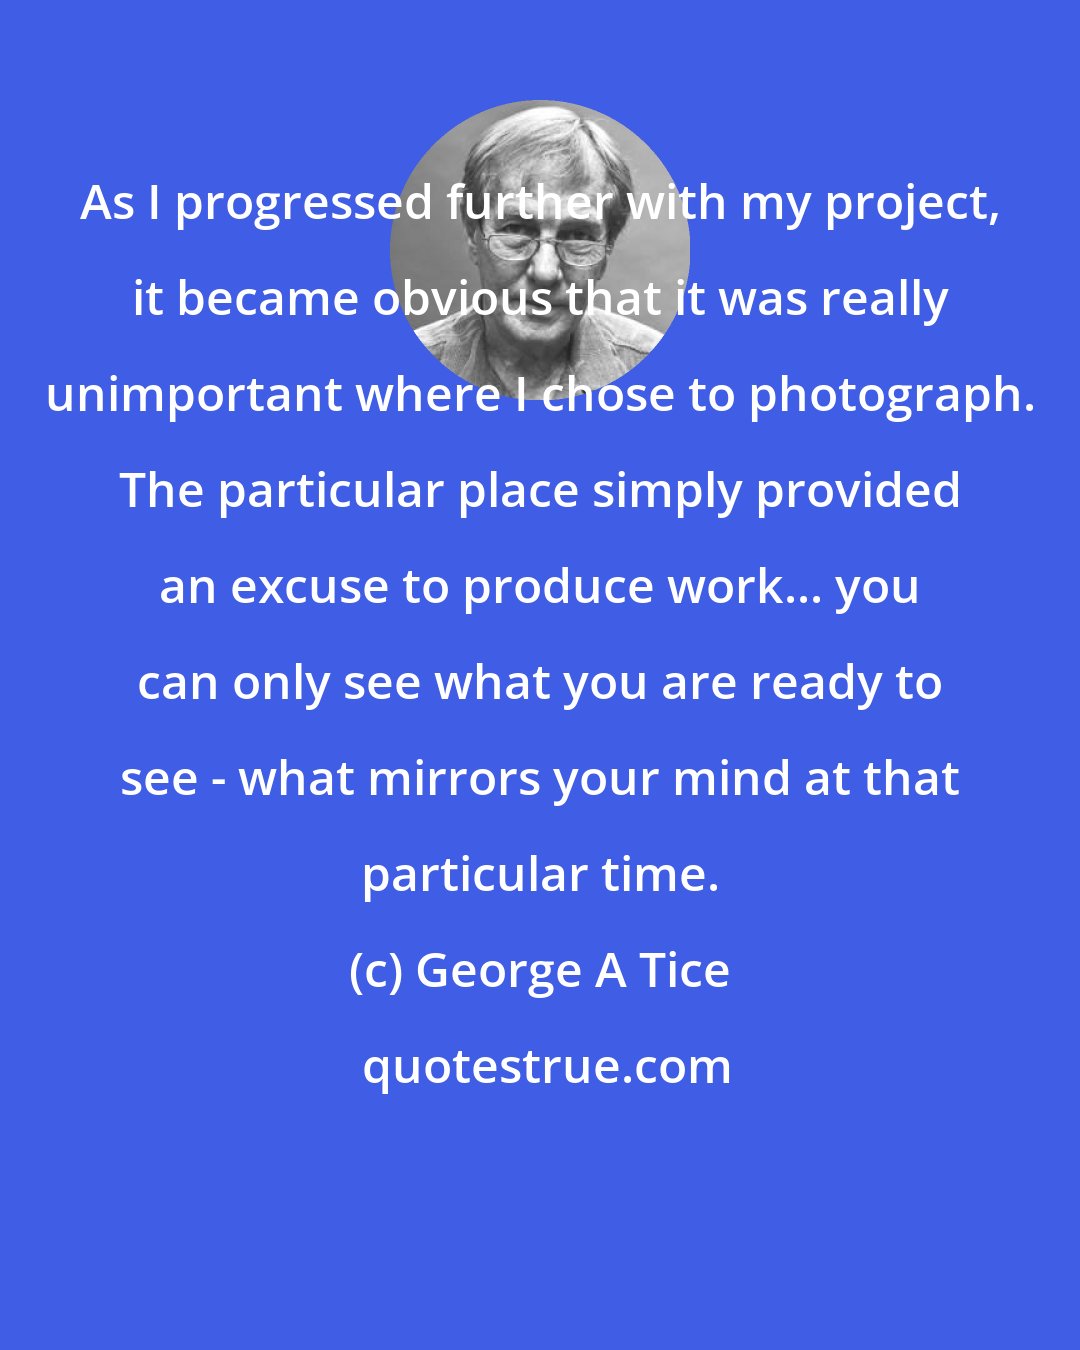 George A Tice: As I progressed further with my project, it became obvious that it was really unimportant where I chose to photograph. The particular place simply provided an excuse to produce work... you can only see what you are ready to see - what mirrors your mind at that particular time.